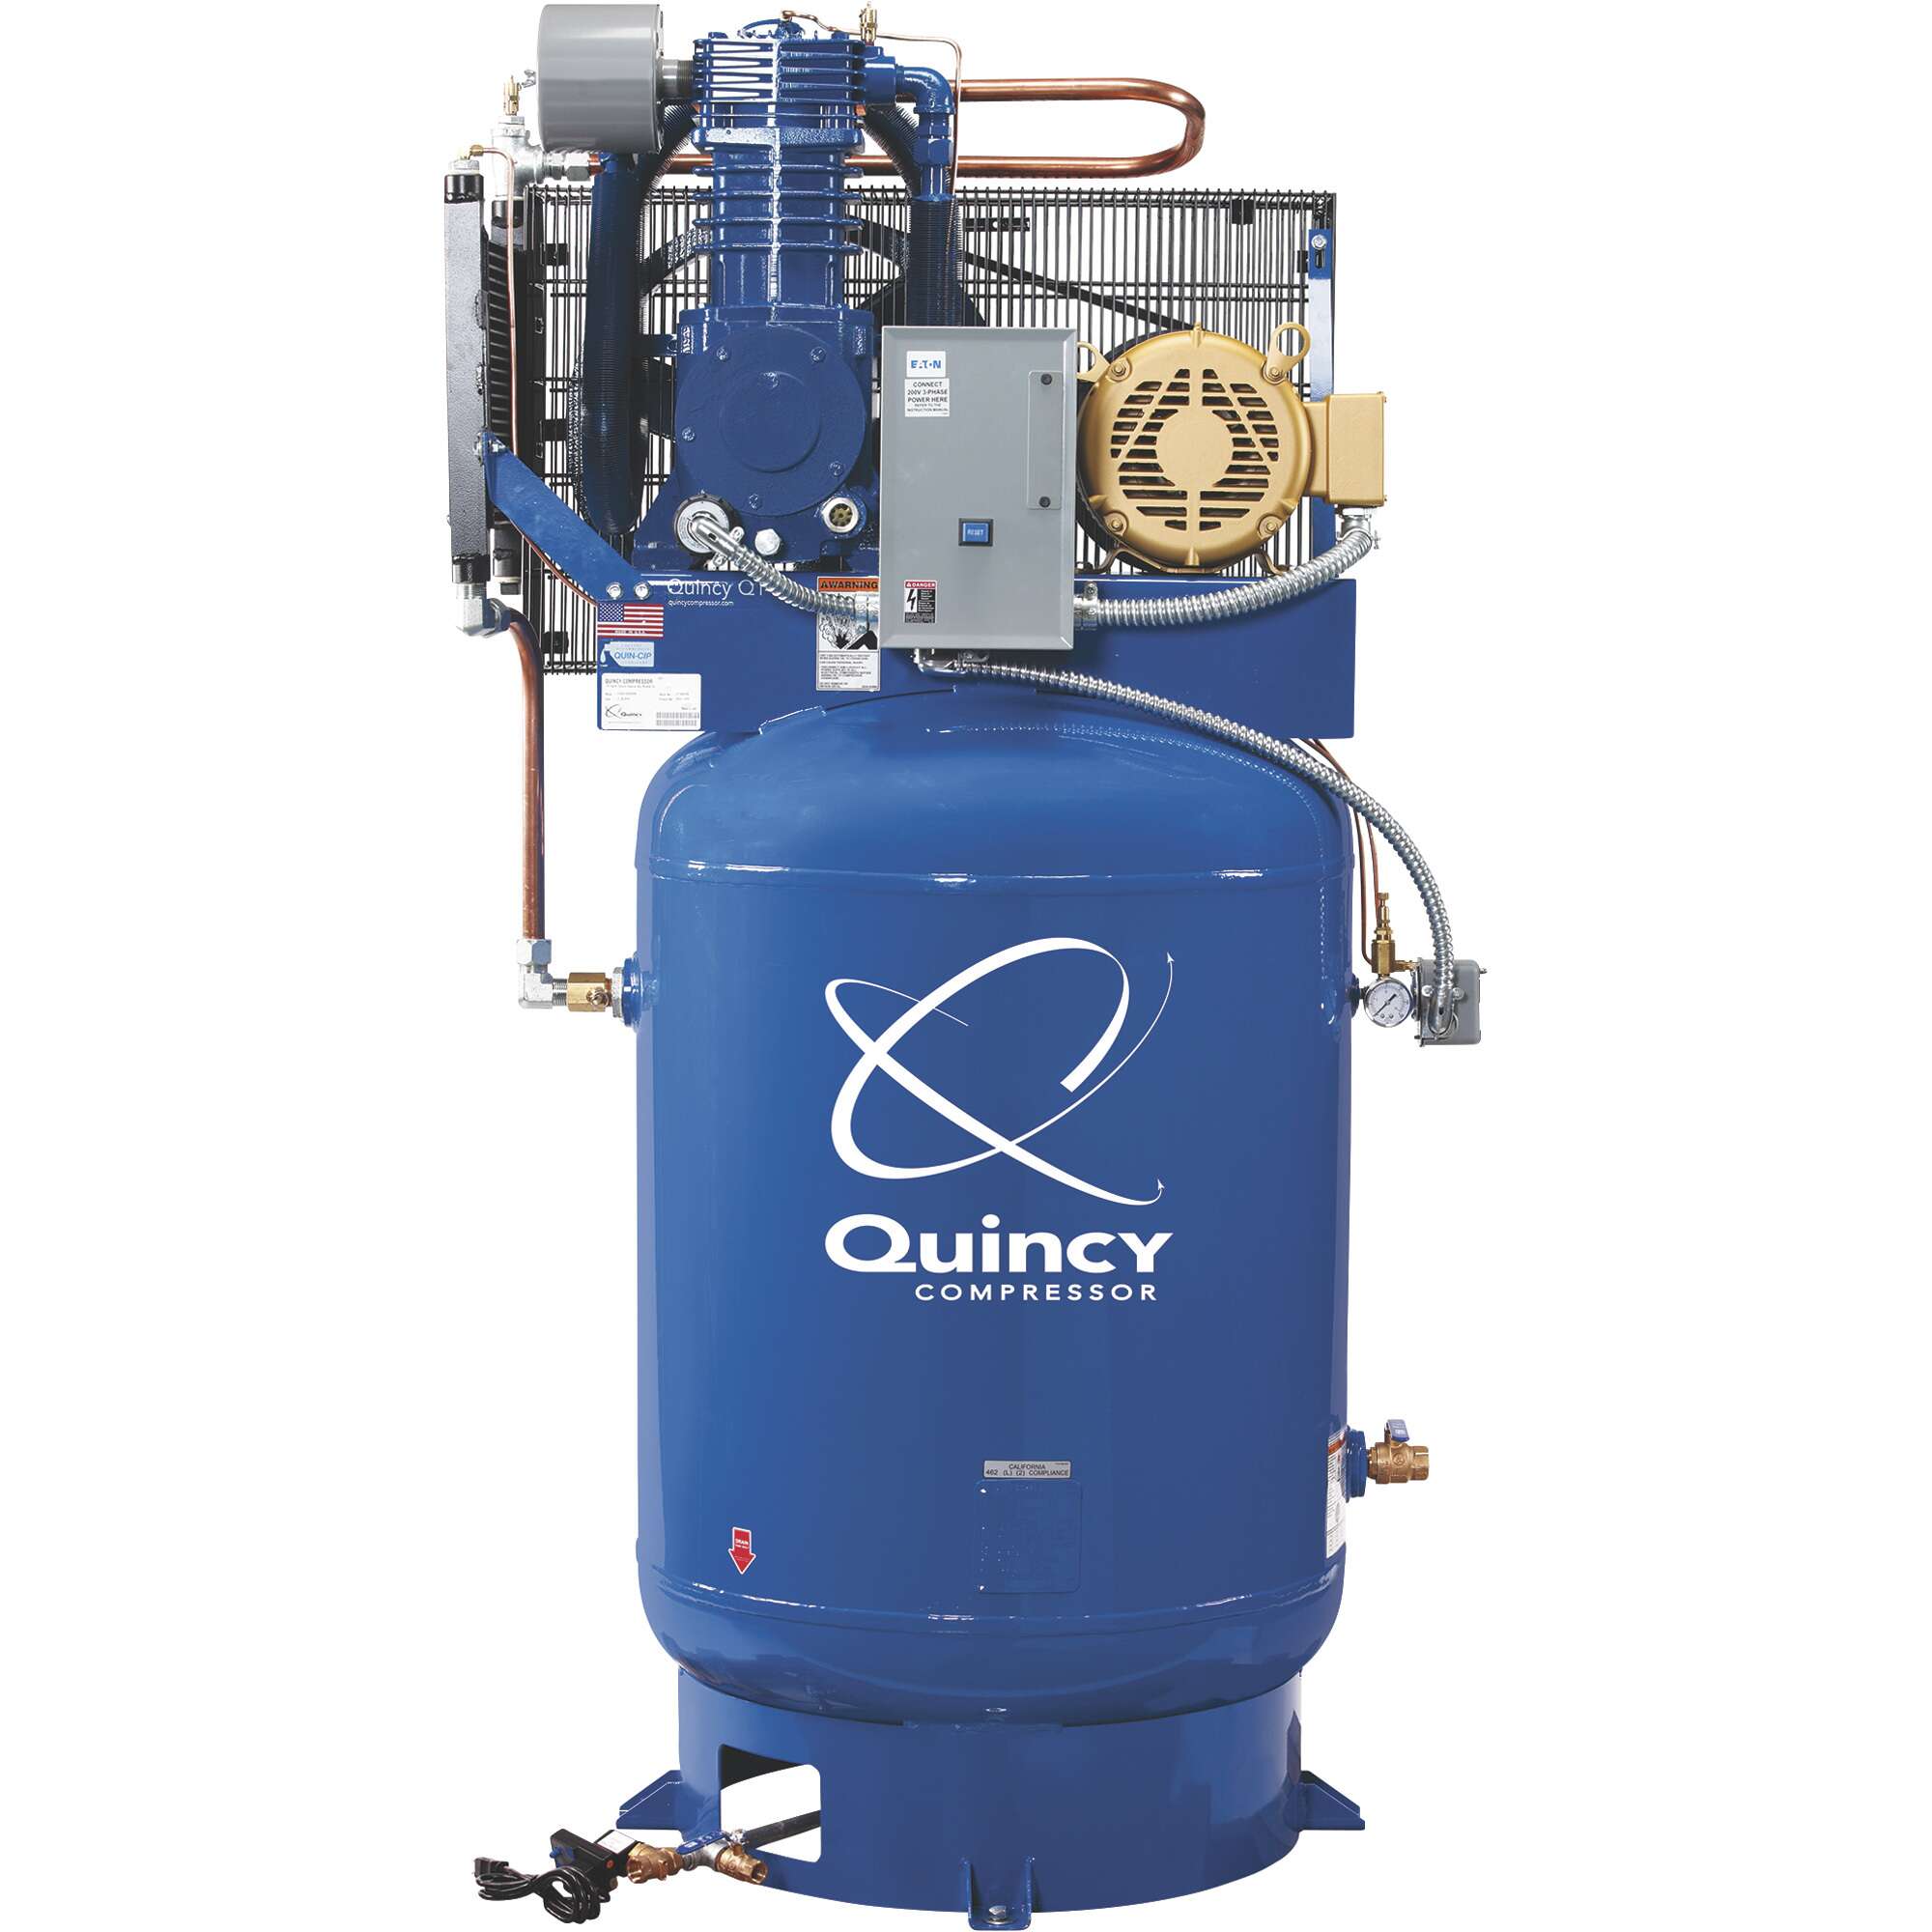 Quincy QT 10 Splash Lubricated Reciprocating Air Compressor with MAX Package 10 HP 208 Volt 3 Phase 120 Gallon Vertical